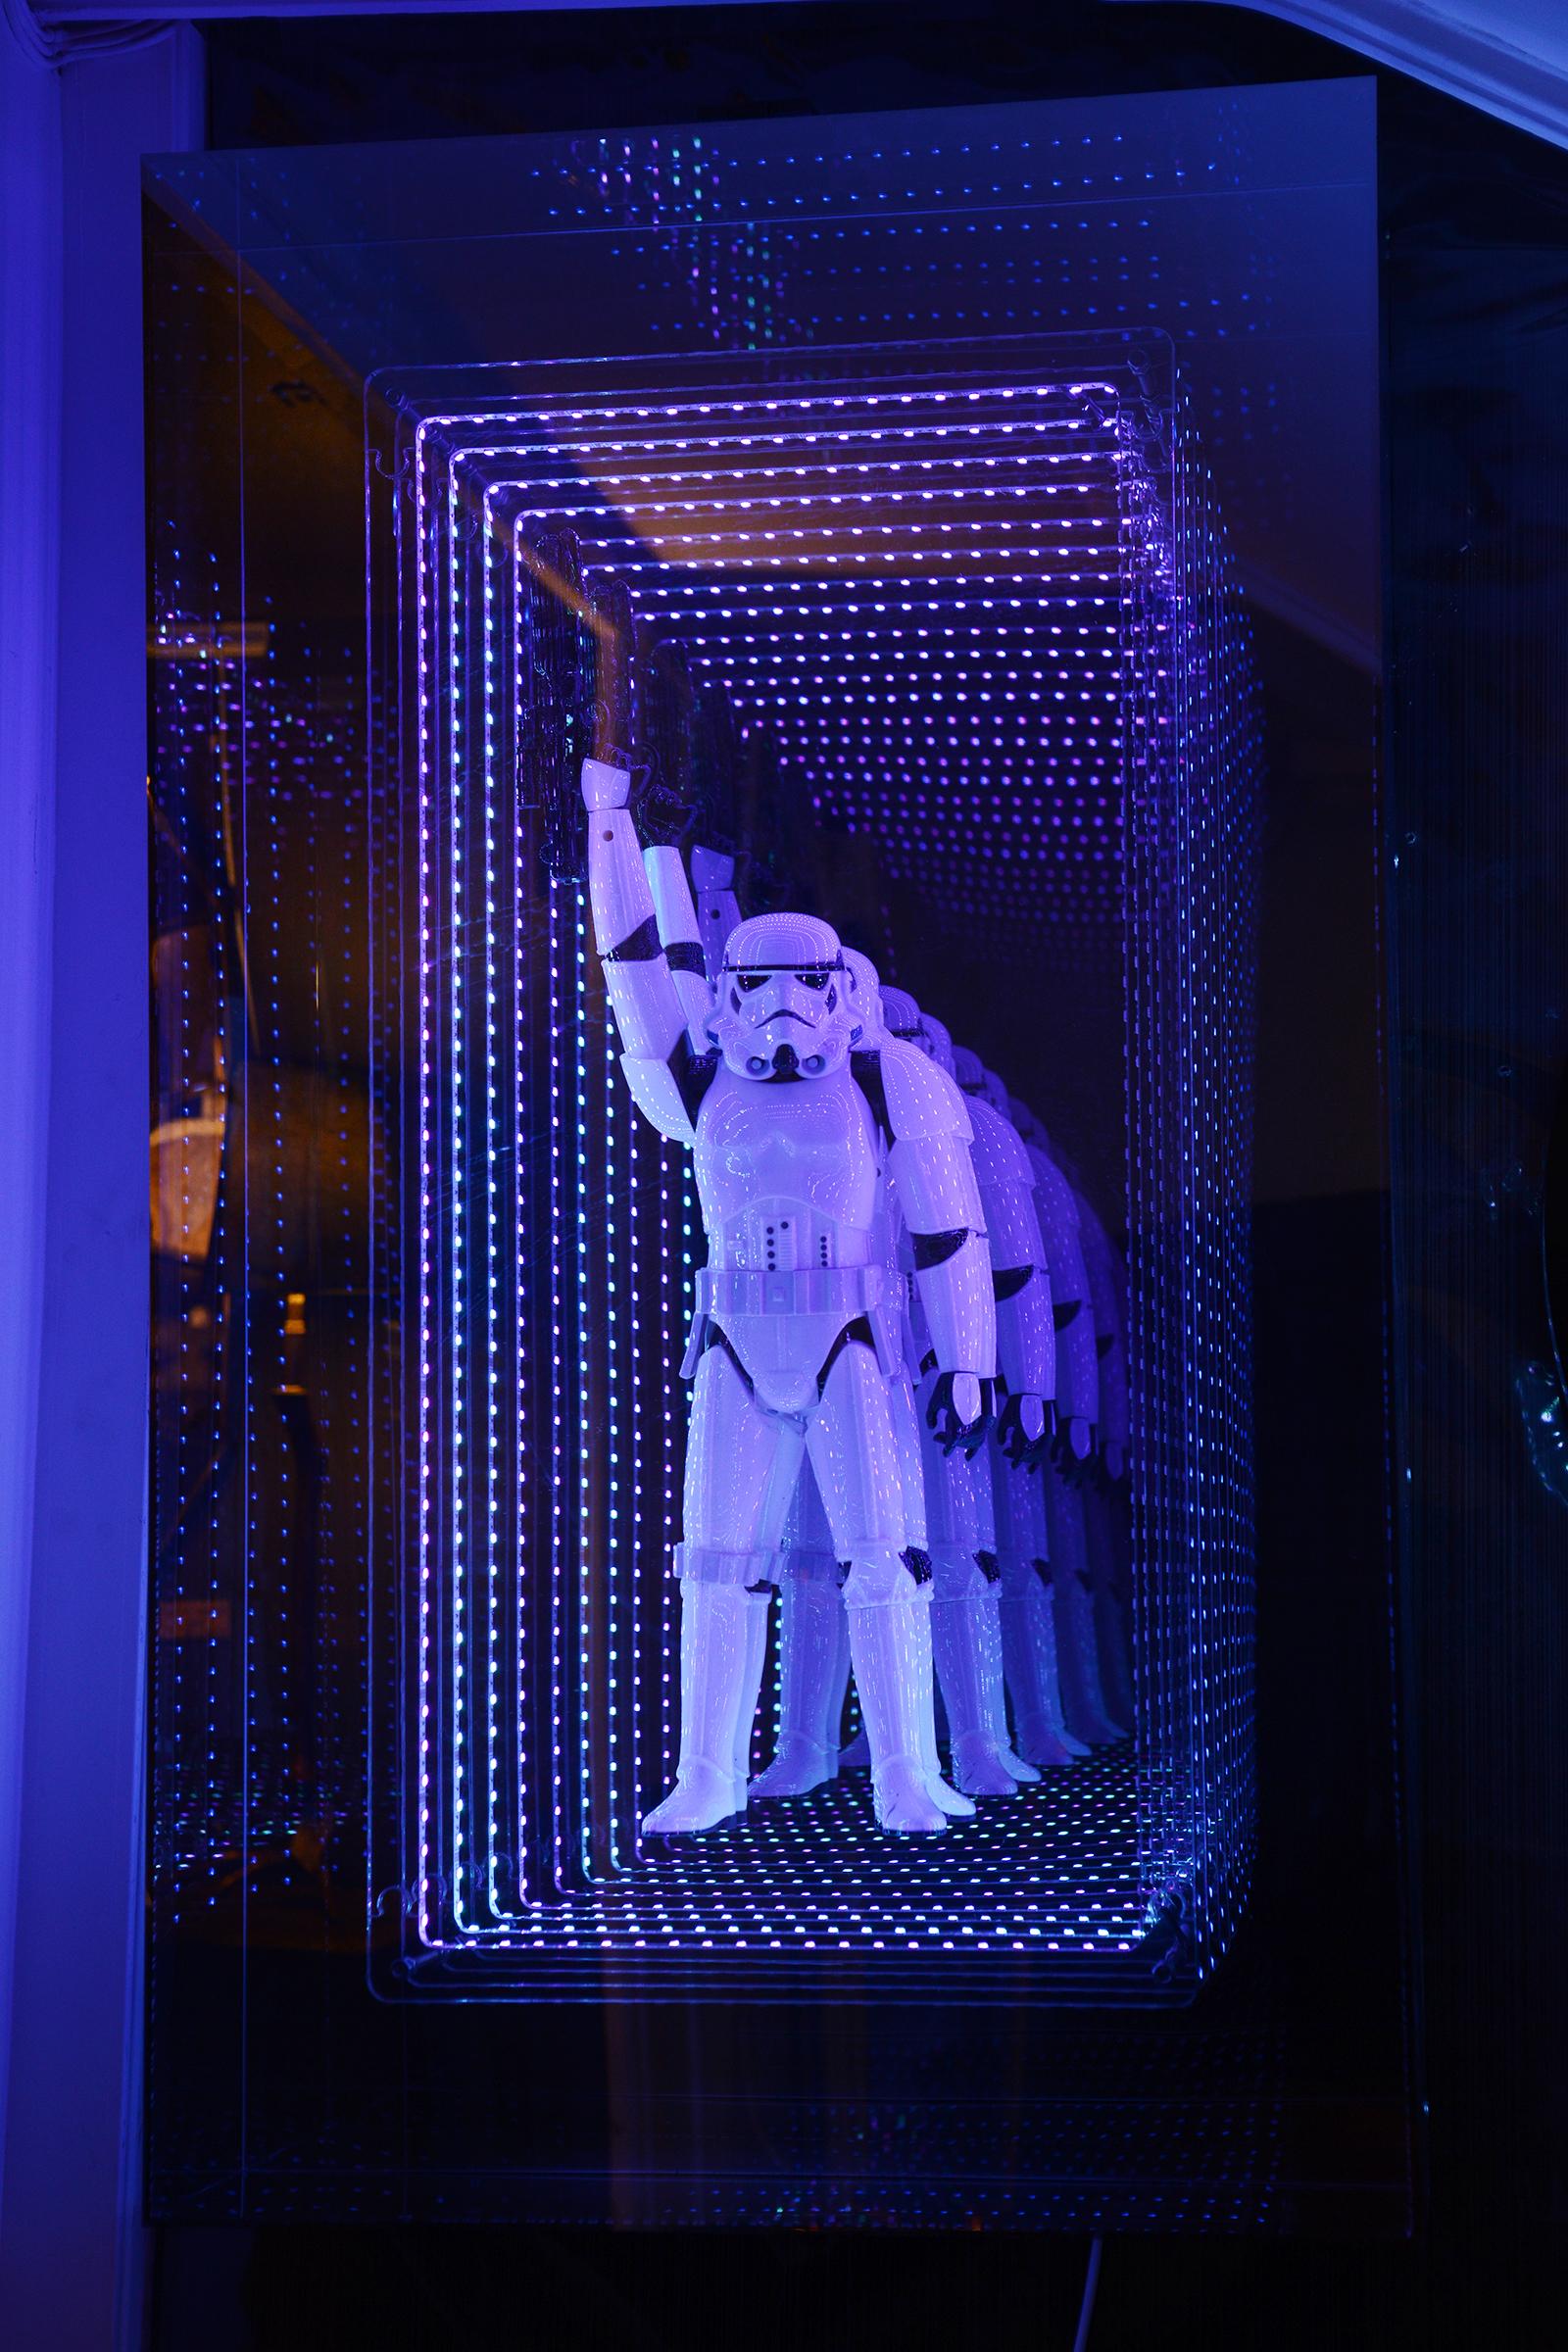 Mirror stormtrooper medium wall decoration mirror
made with led lights with mirrored glass and plexiglass
creating an infiny mirrored effect. With lacquered resin
white stormtrooper Star Wars. Exceptional piece made
in 2020 by Raphael Fenice.